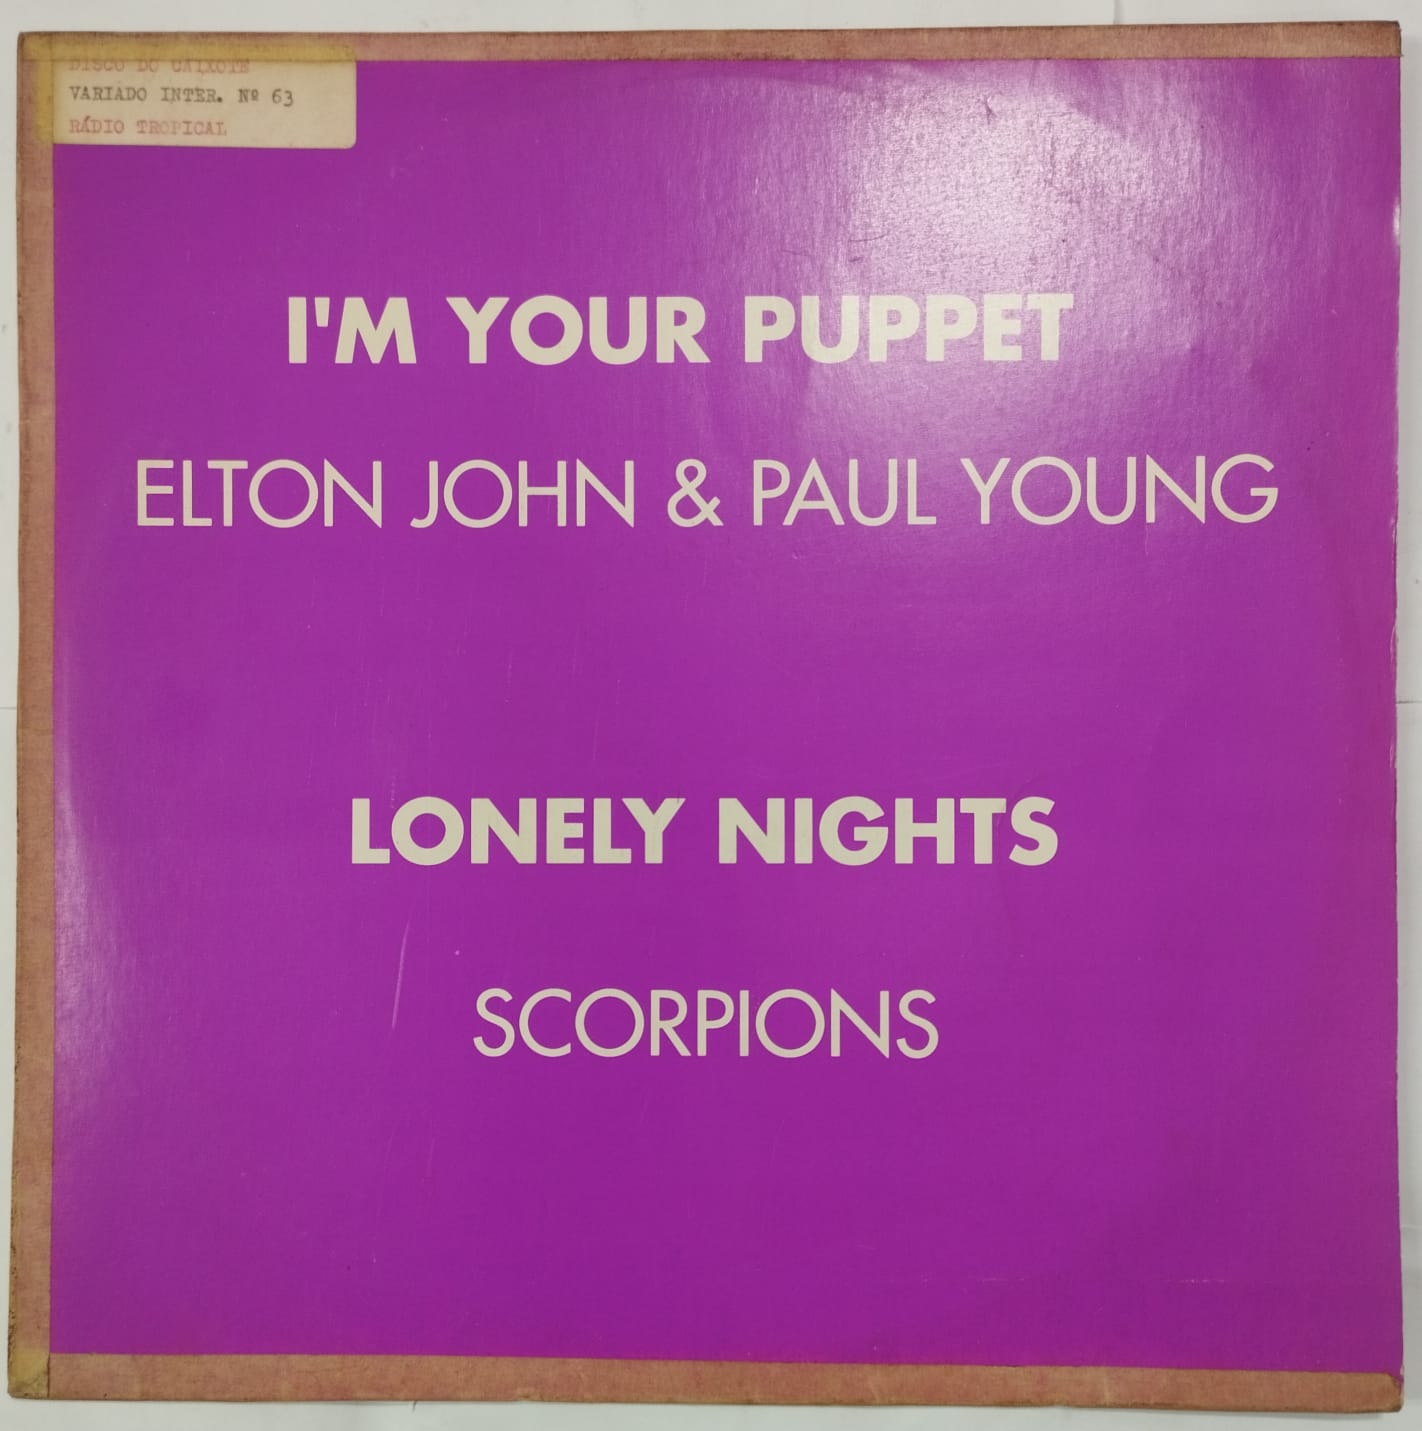 Elton John & Paul Young / Scorpions – I'm Your Puppet / Lonely Nights (Promo)